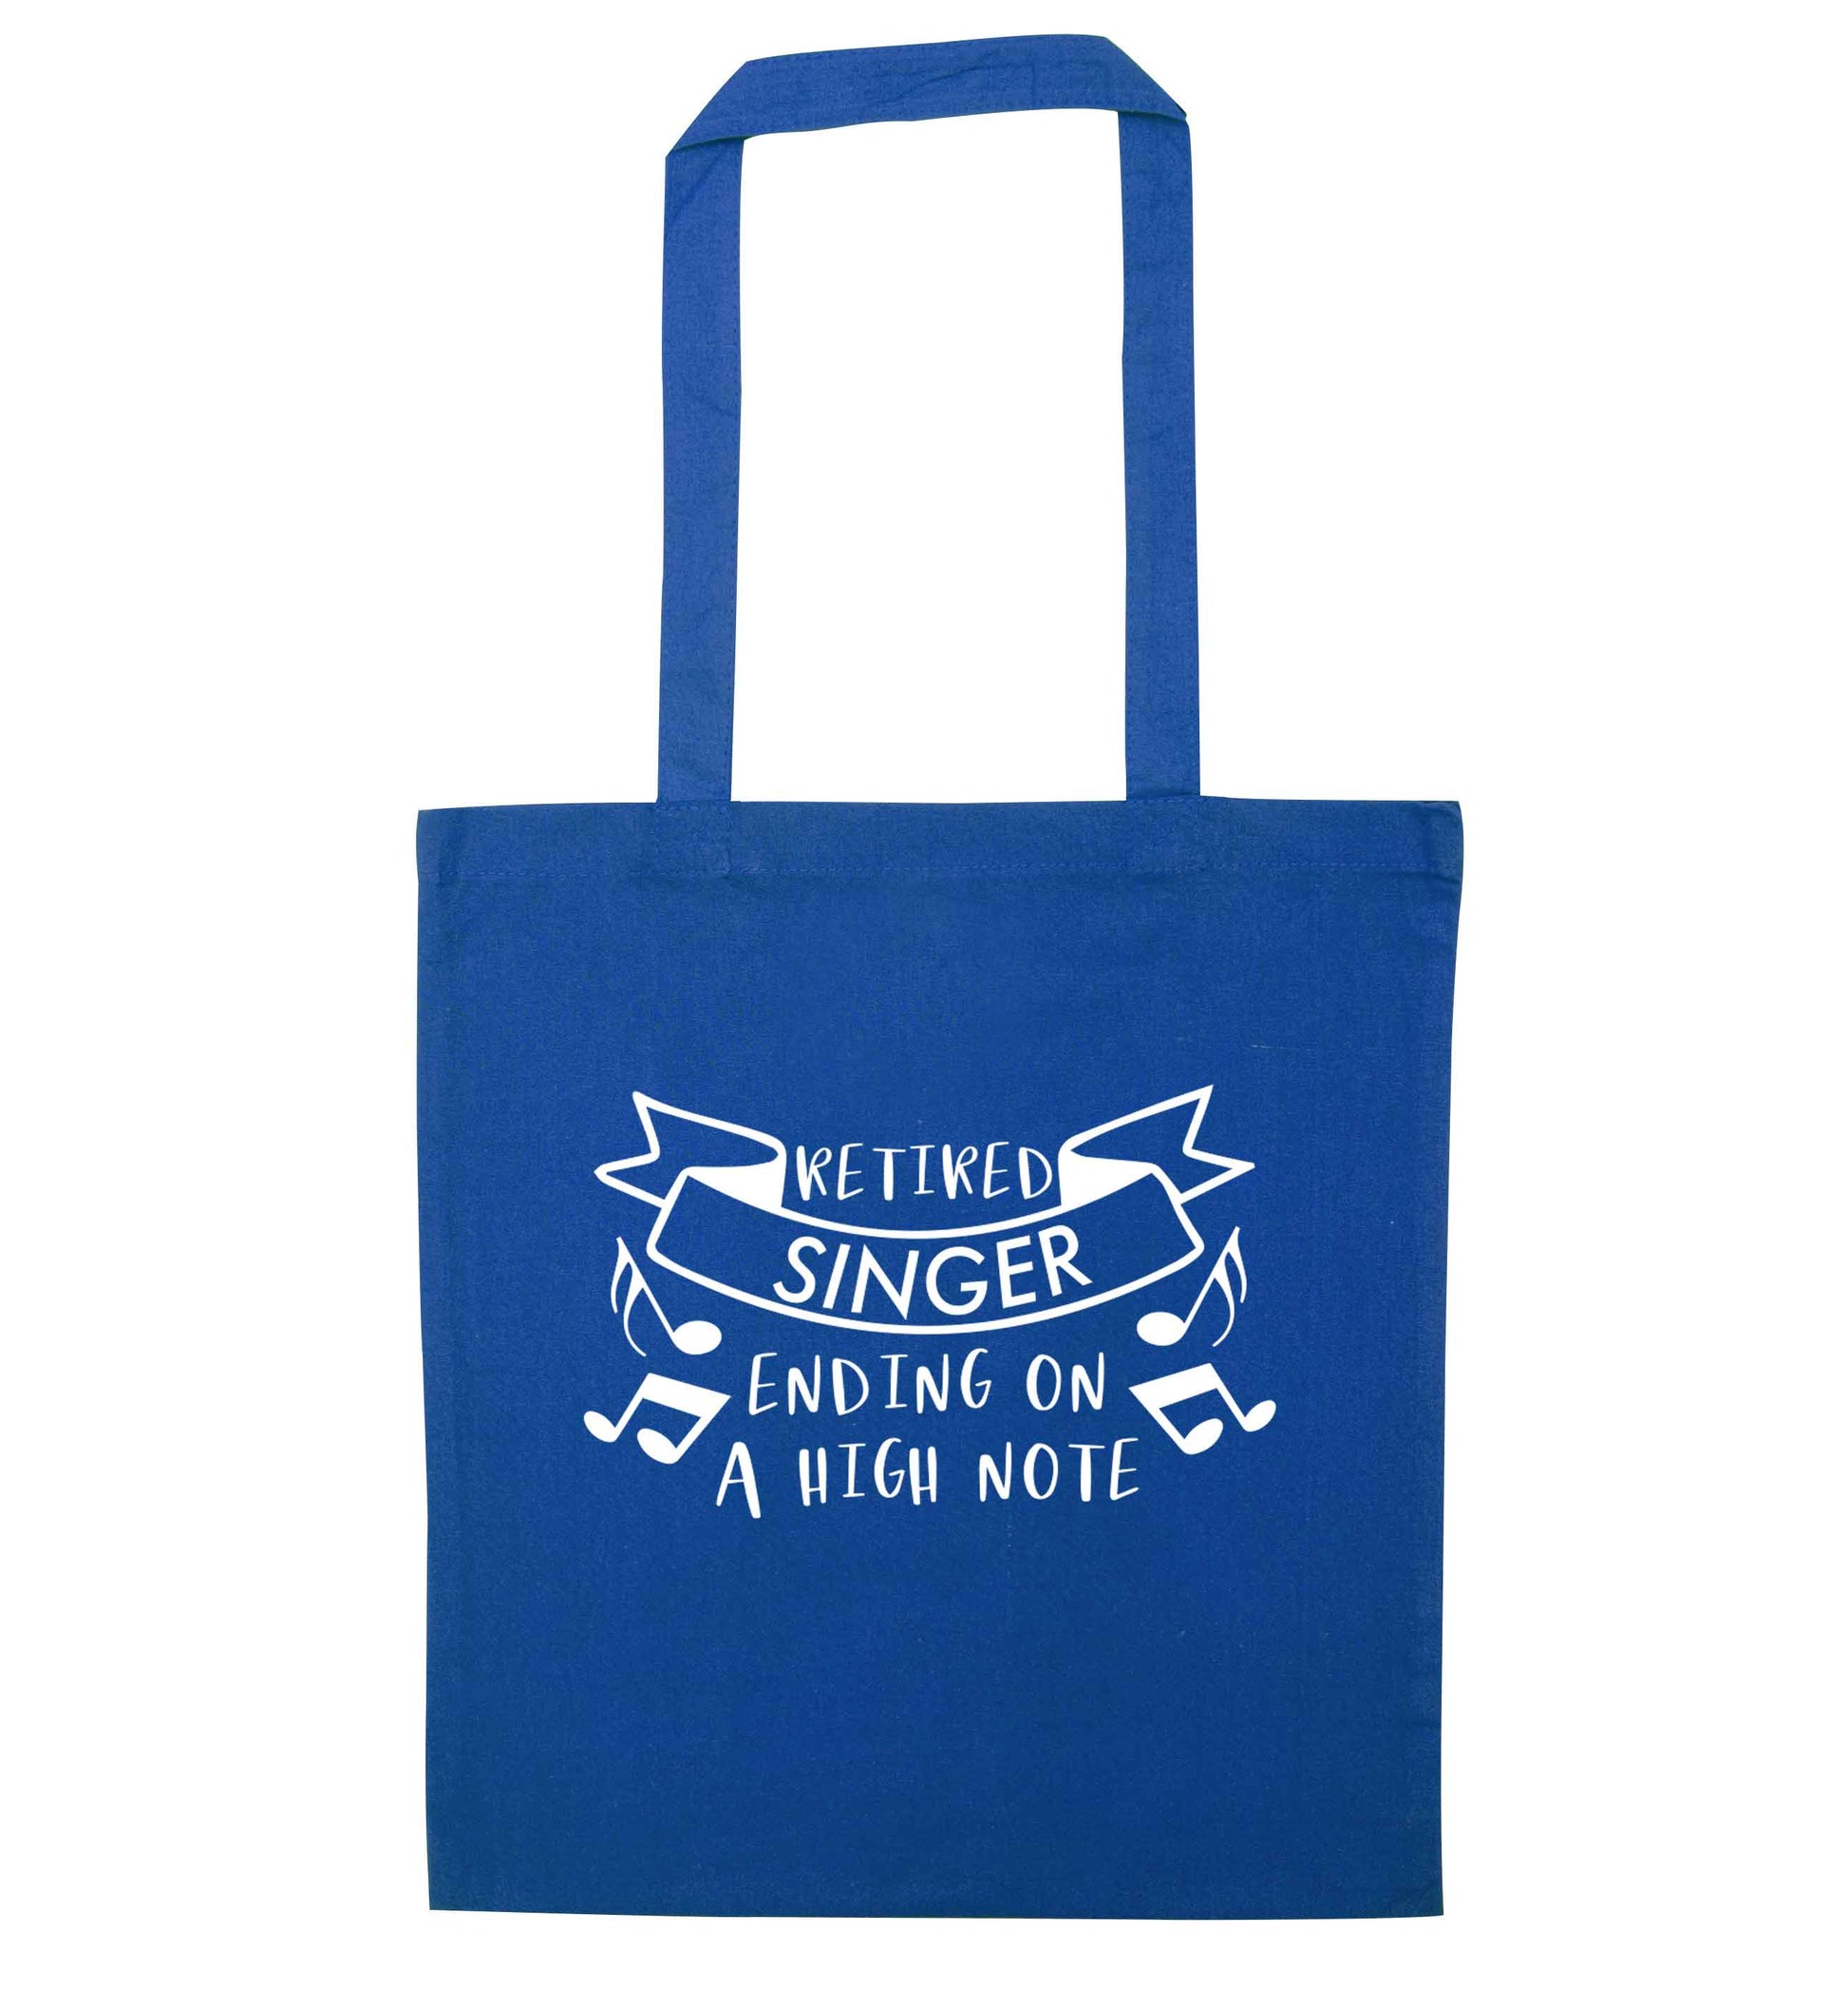 Retired singer ending on a high note blue tote bag